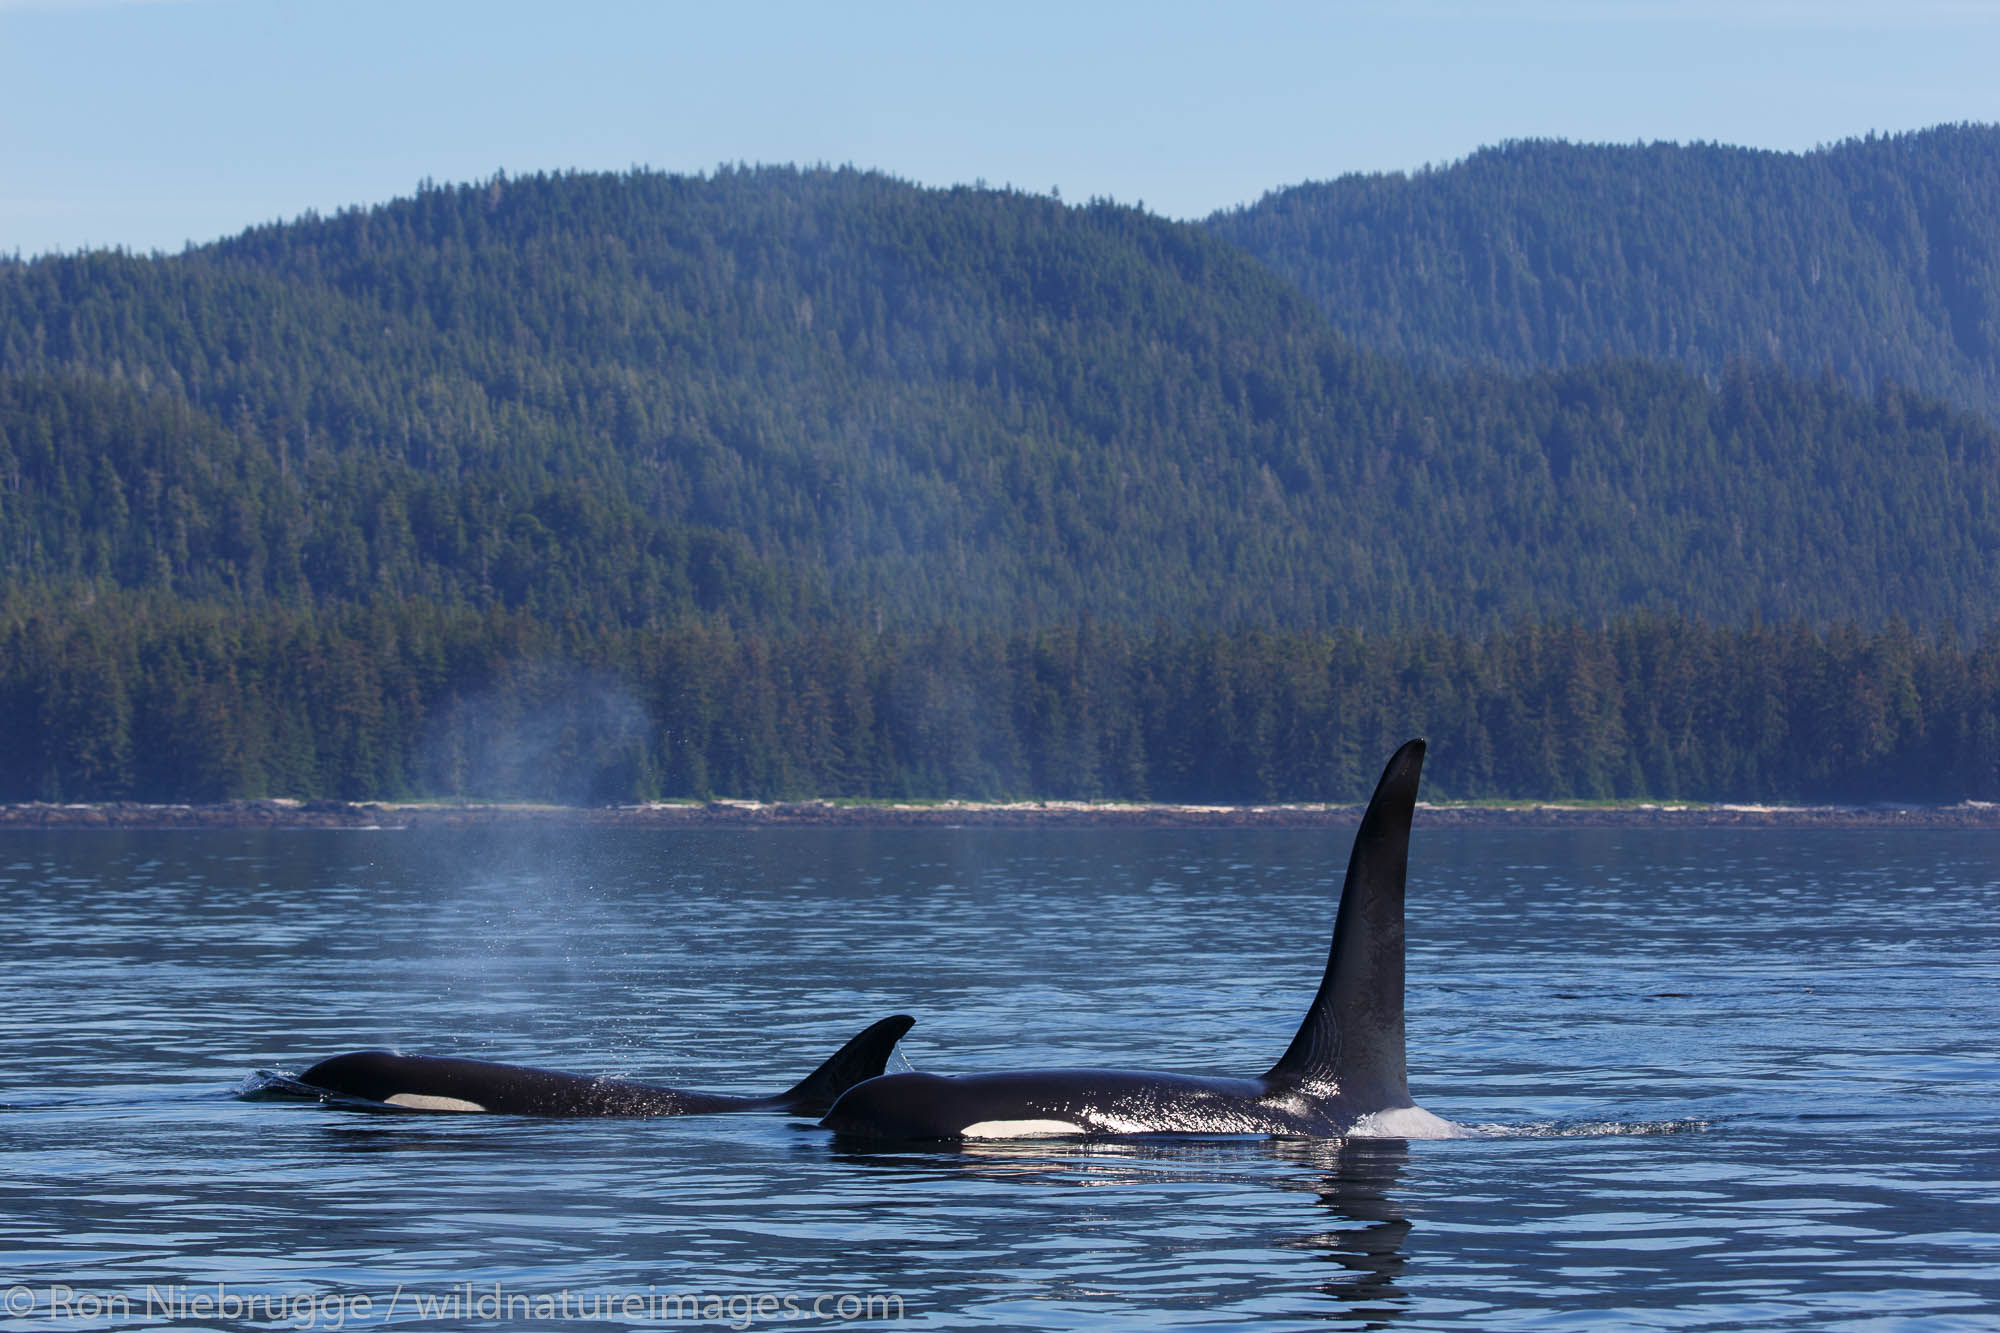 Orcas from the AF5 pod, Frederick Sound, Tongass National Forest, Alaska.